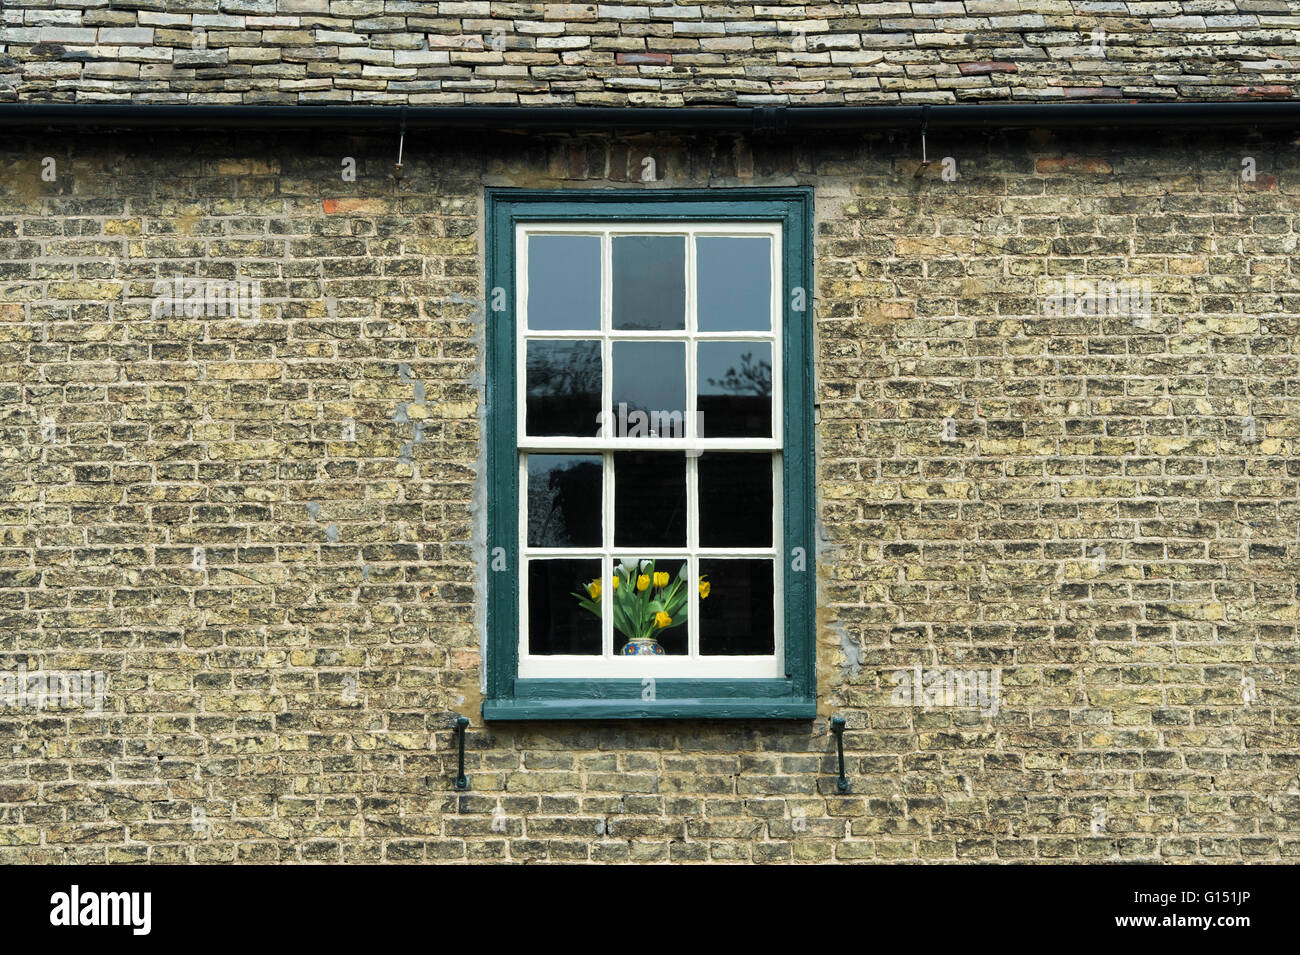 Yellow flowers in a vase in a sash window. Ely, Cambridgeshire, England Stock Photo